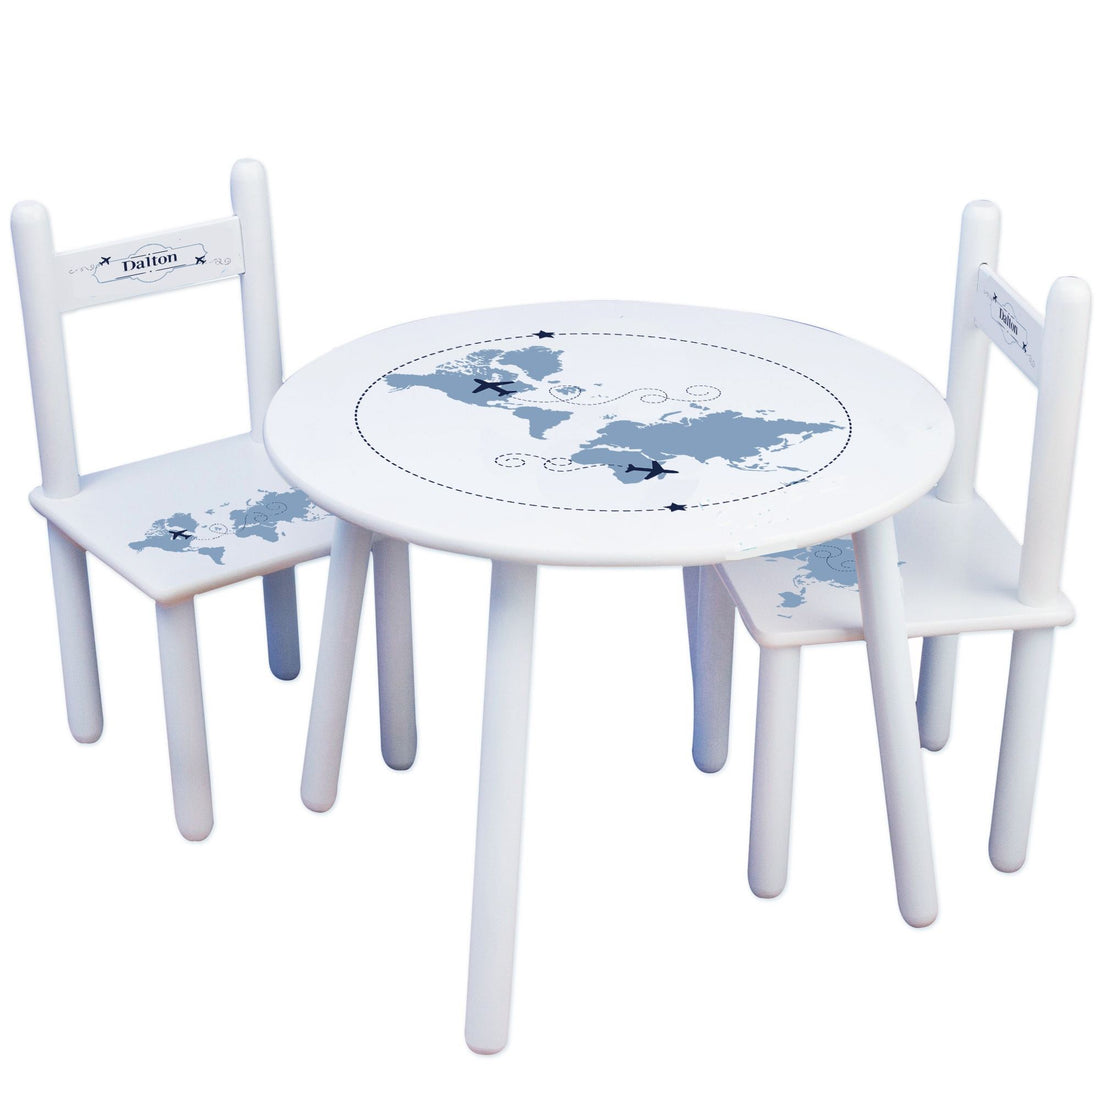 Personalized Table and Chairs with World Map Blue design